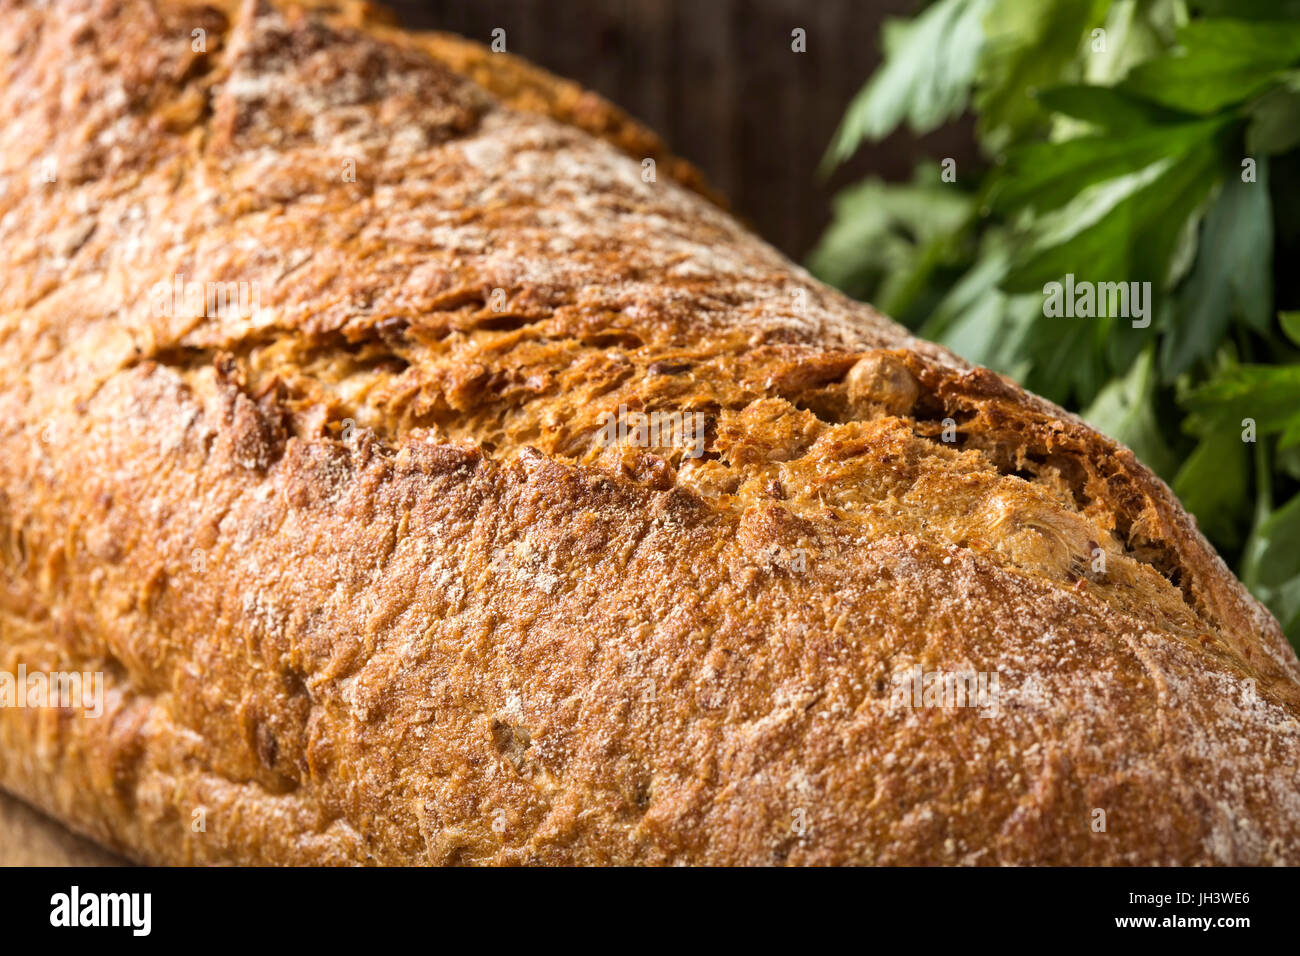 Close-up of freshly baked homemade bread and parsley bunch in background Stock Photo